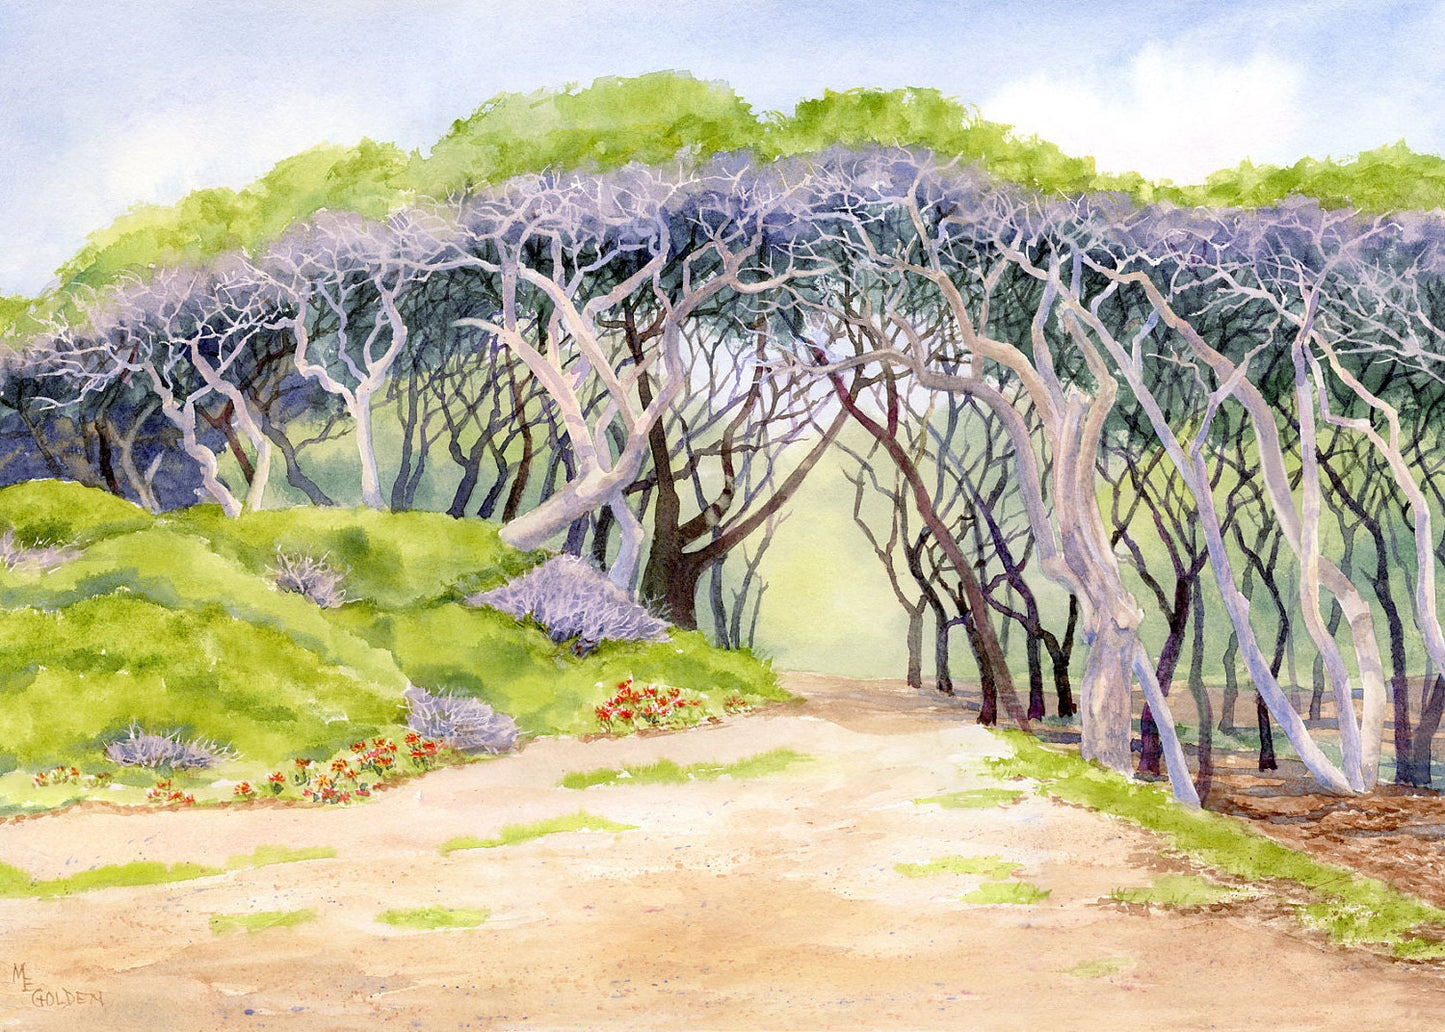 Canopy of Weathered Trees at Fort Fisher Giclée Print